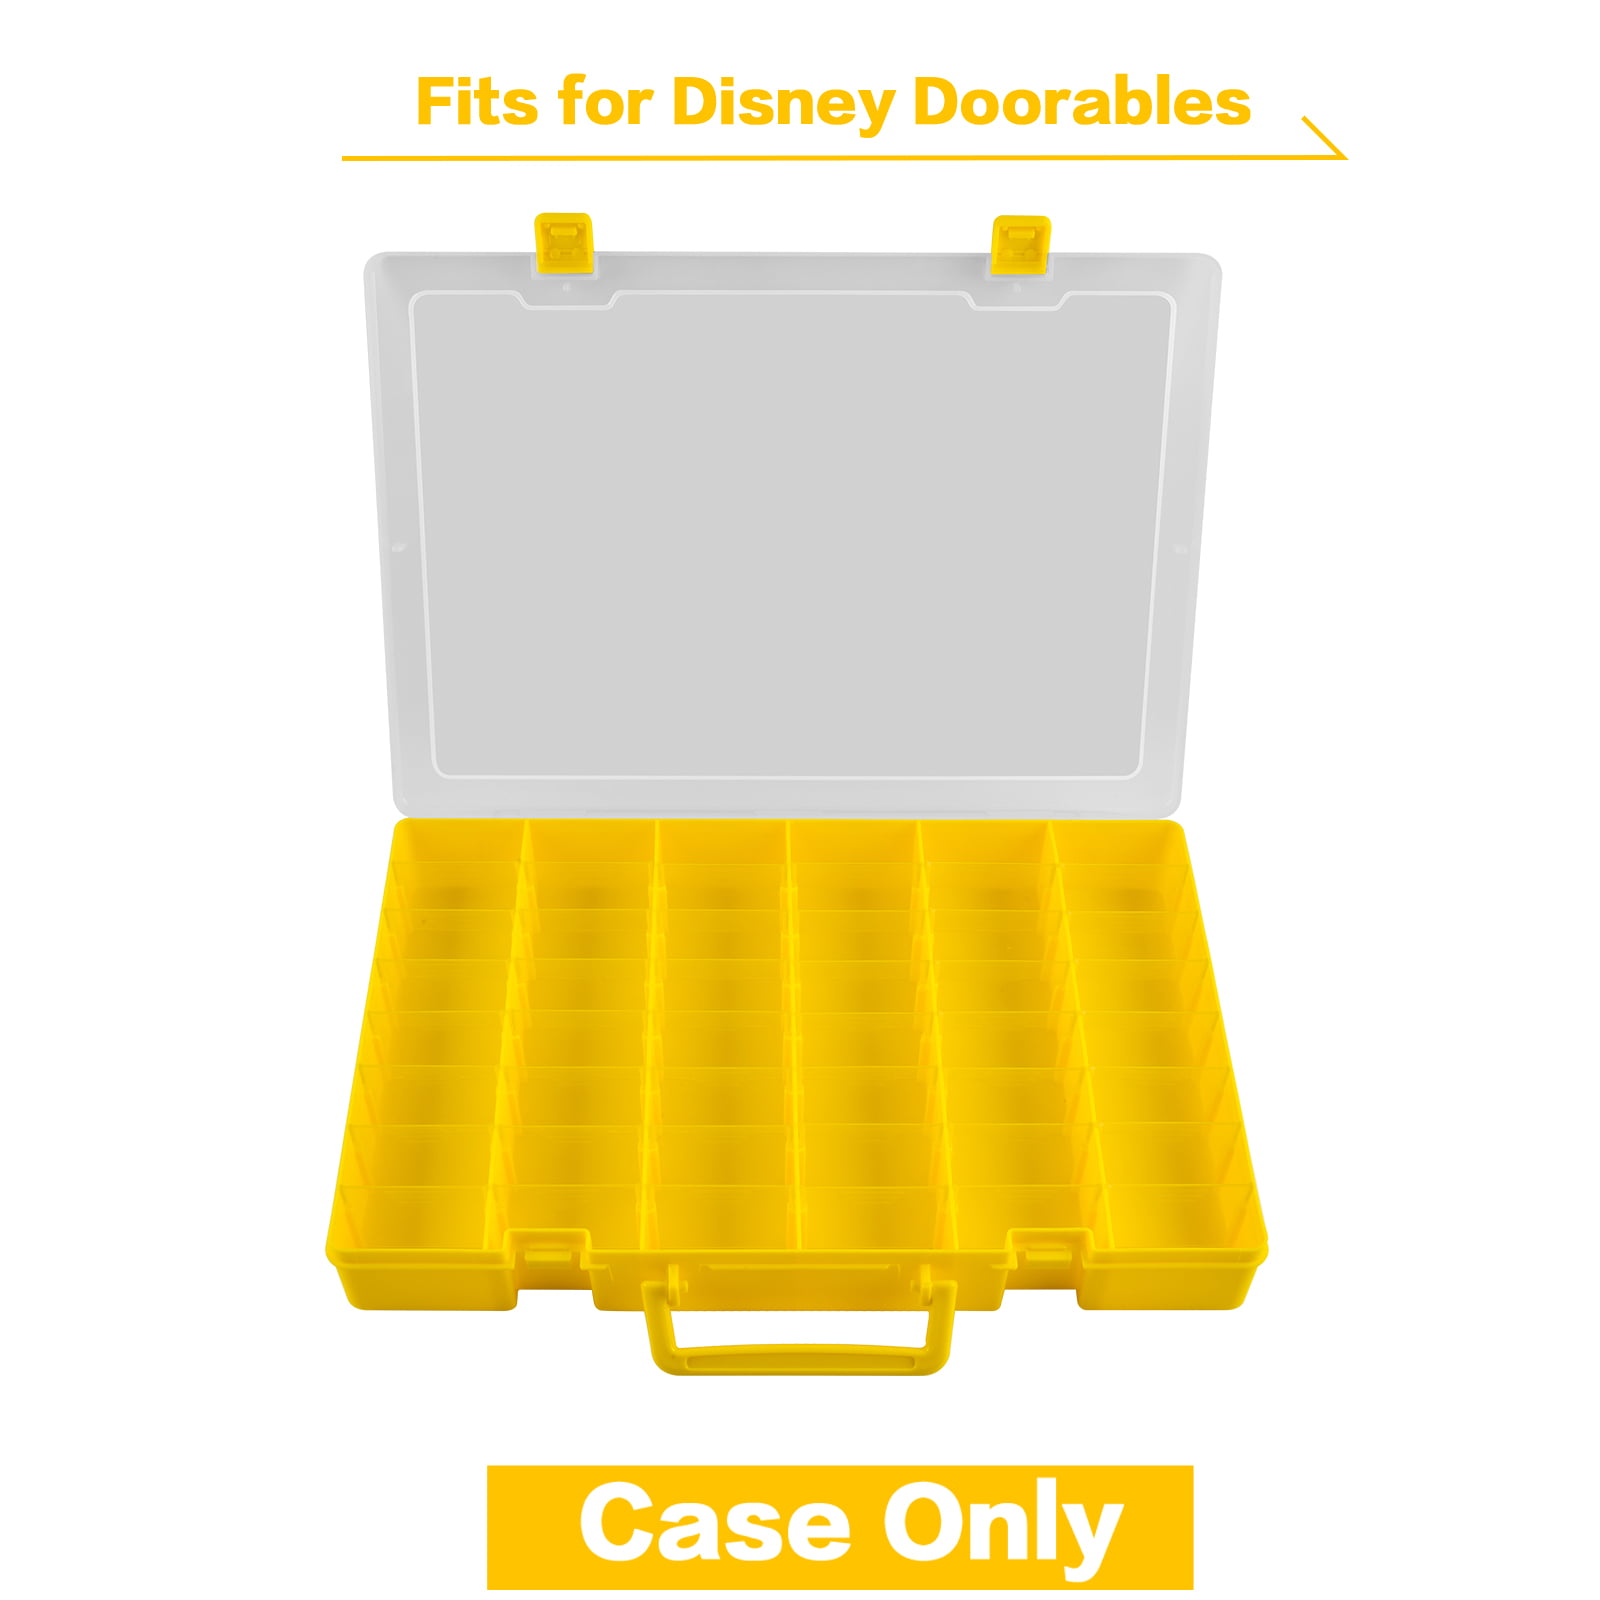 Case Compatible with Disney Doorables Multi Peek Series 7 8 6 5,  Collectible Mini Figures Playset Collector Storage for Disney Princess  Characters